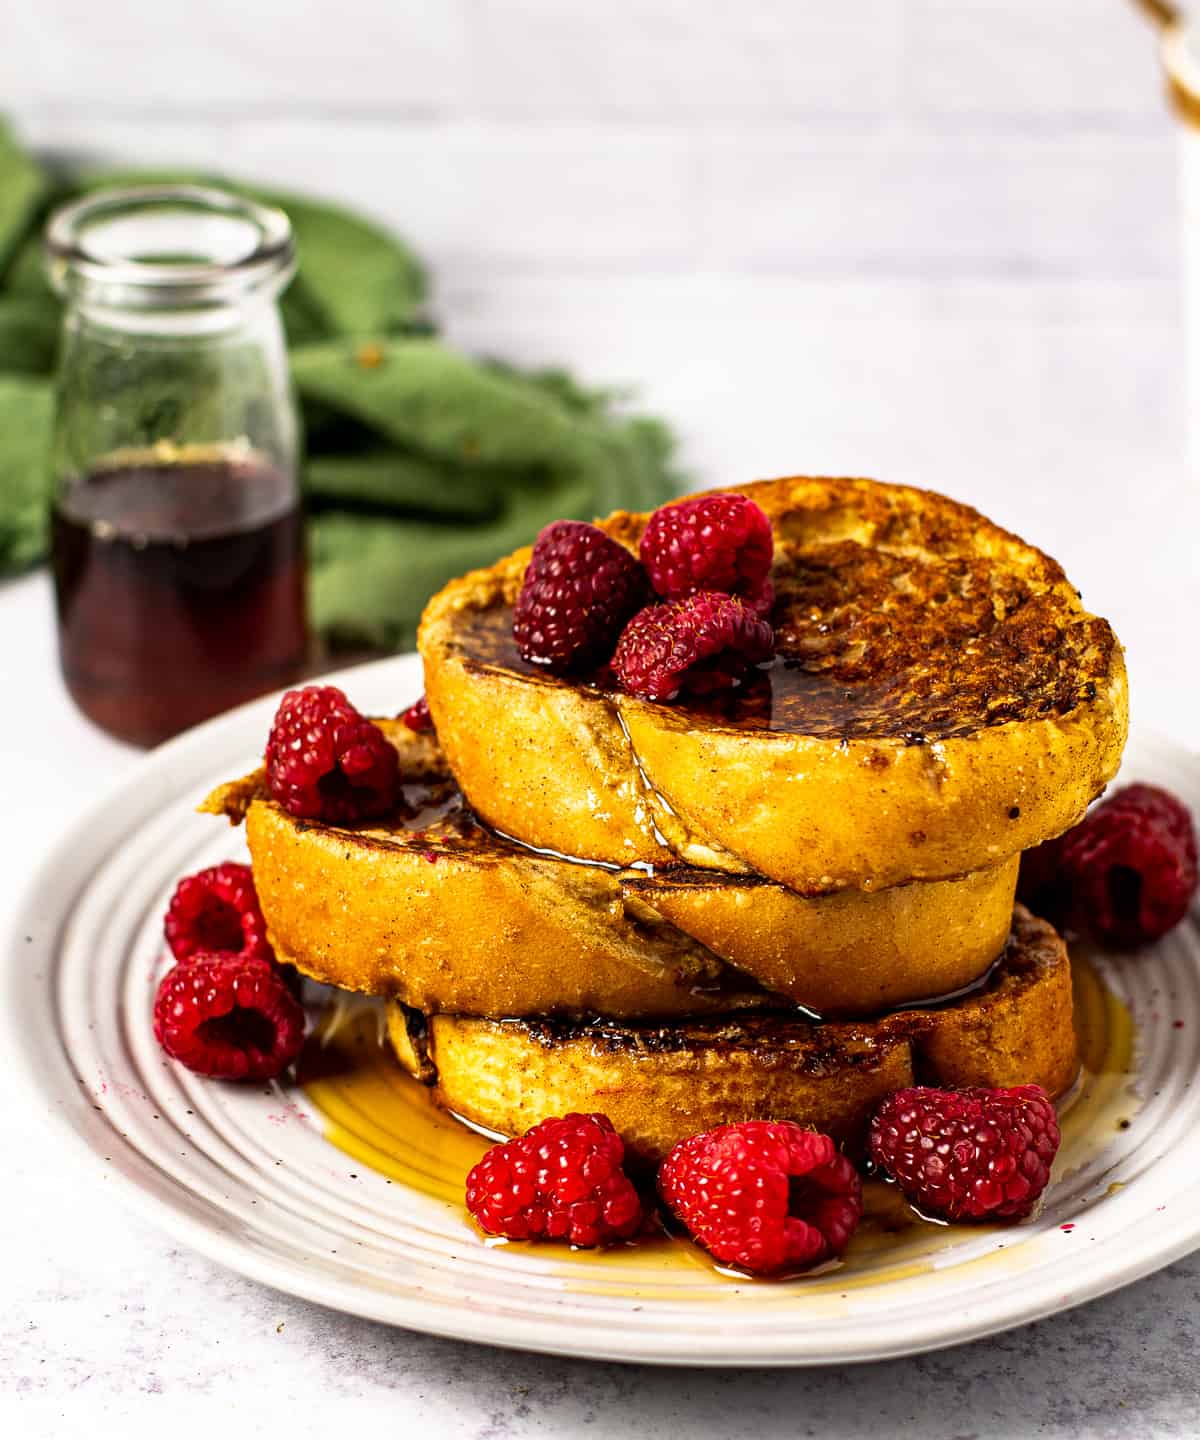 vegan french toast on plate with syrup and raspberries